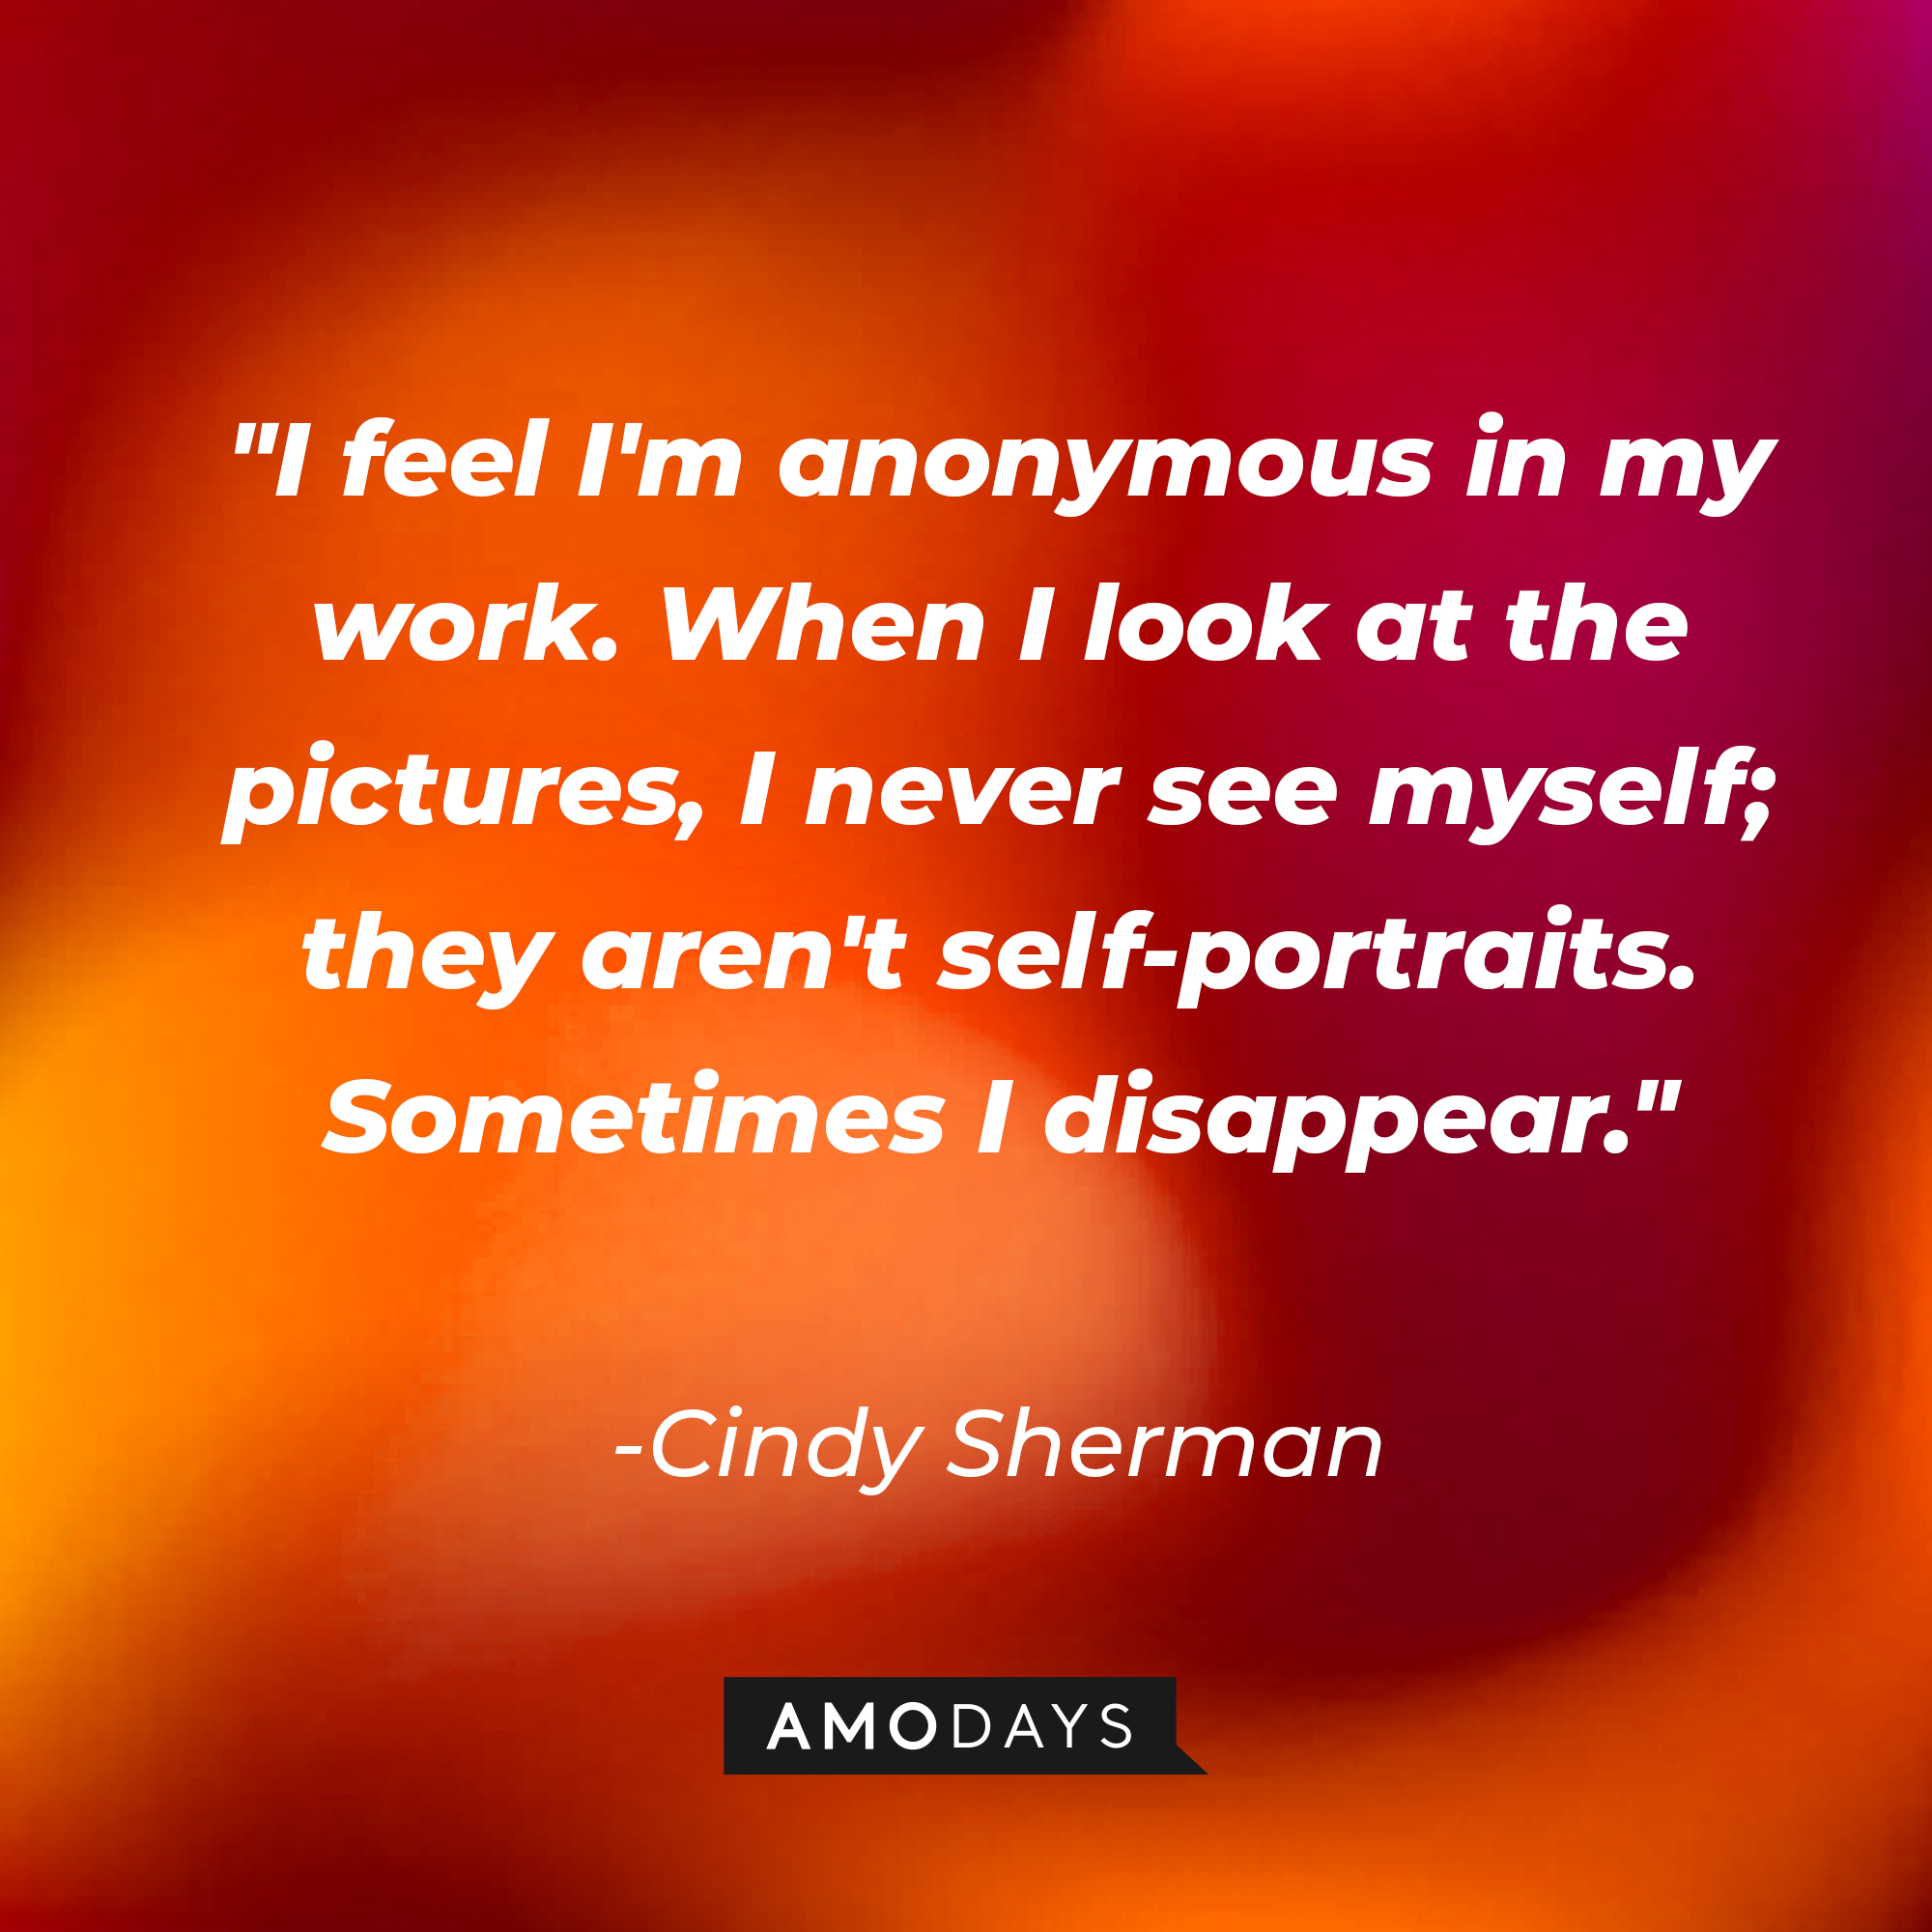 Cindy Sherman's quote: "I feel I'm anonymous in my work. When I look at the pictures, I never see myself; they aren't self-portraits. Sometimes I disappear." | Image: AmoDays